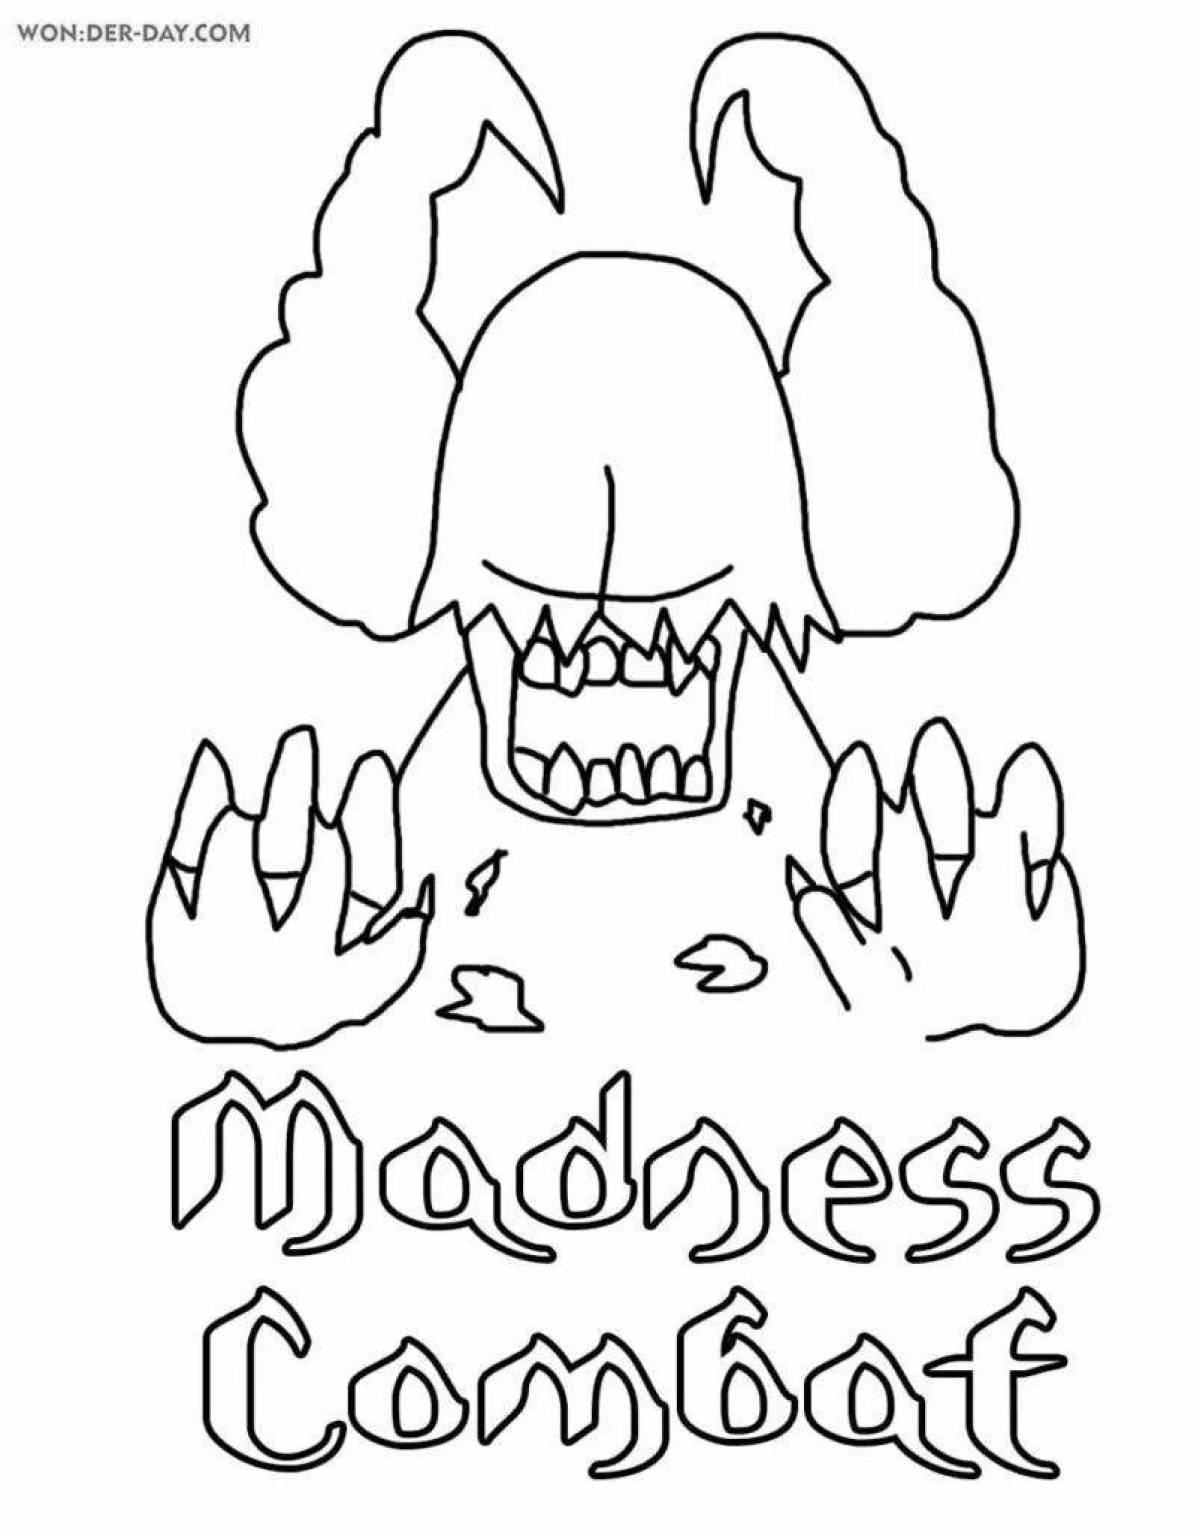 Magic madness coloring page